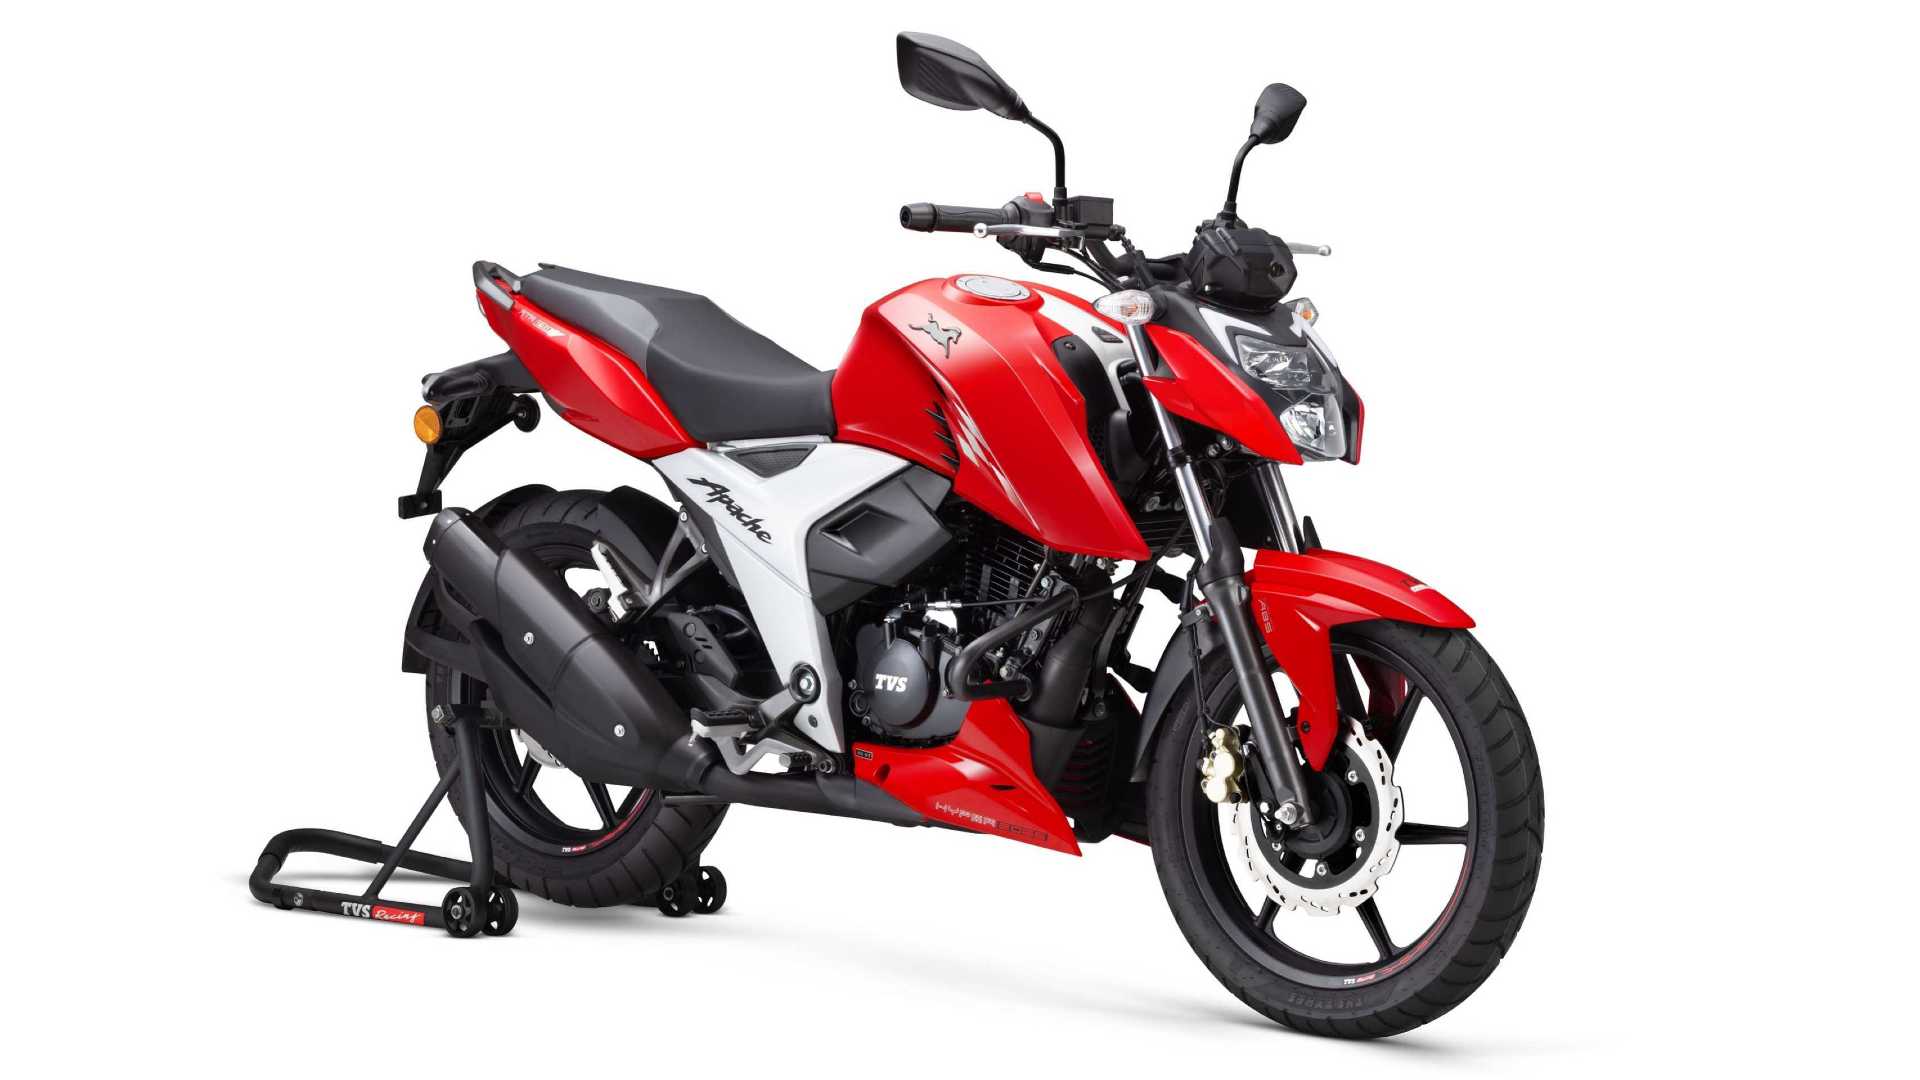 Updated Tvs Apache Rtr 160 4v Launched At Rs 1 07 Lakh Is Lighter And More Powerful Technology News Firstpost